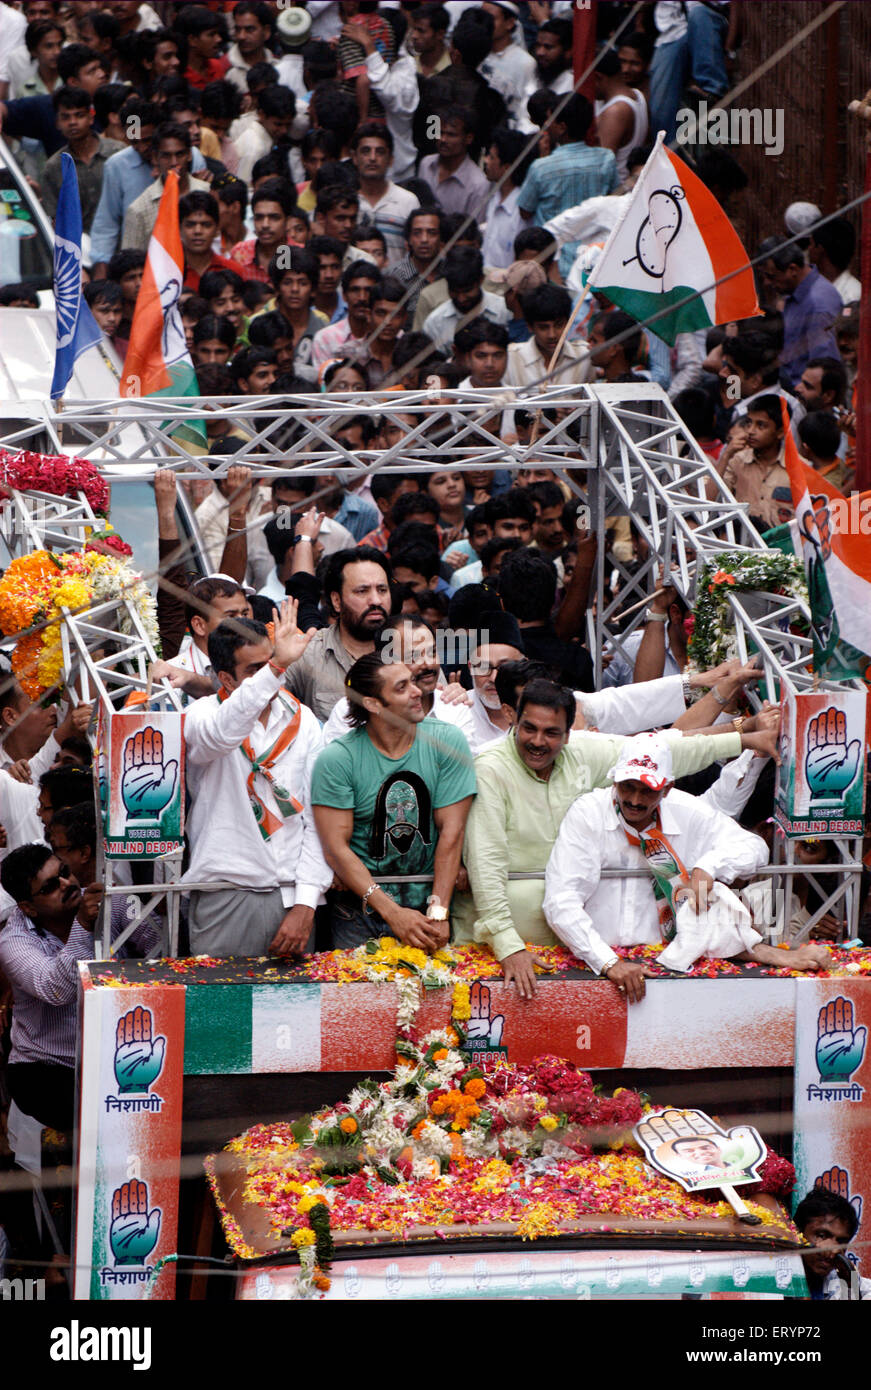 Indian election campaign, Salman Khan, Indian bollywood actor , campaigning for Indian National Congress candidate Milind Deora in Bombay Mumbai India Stock Photo